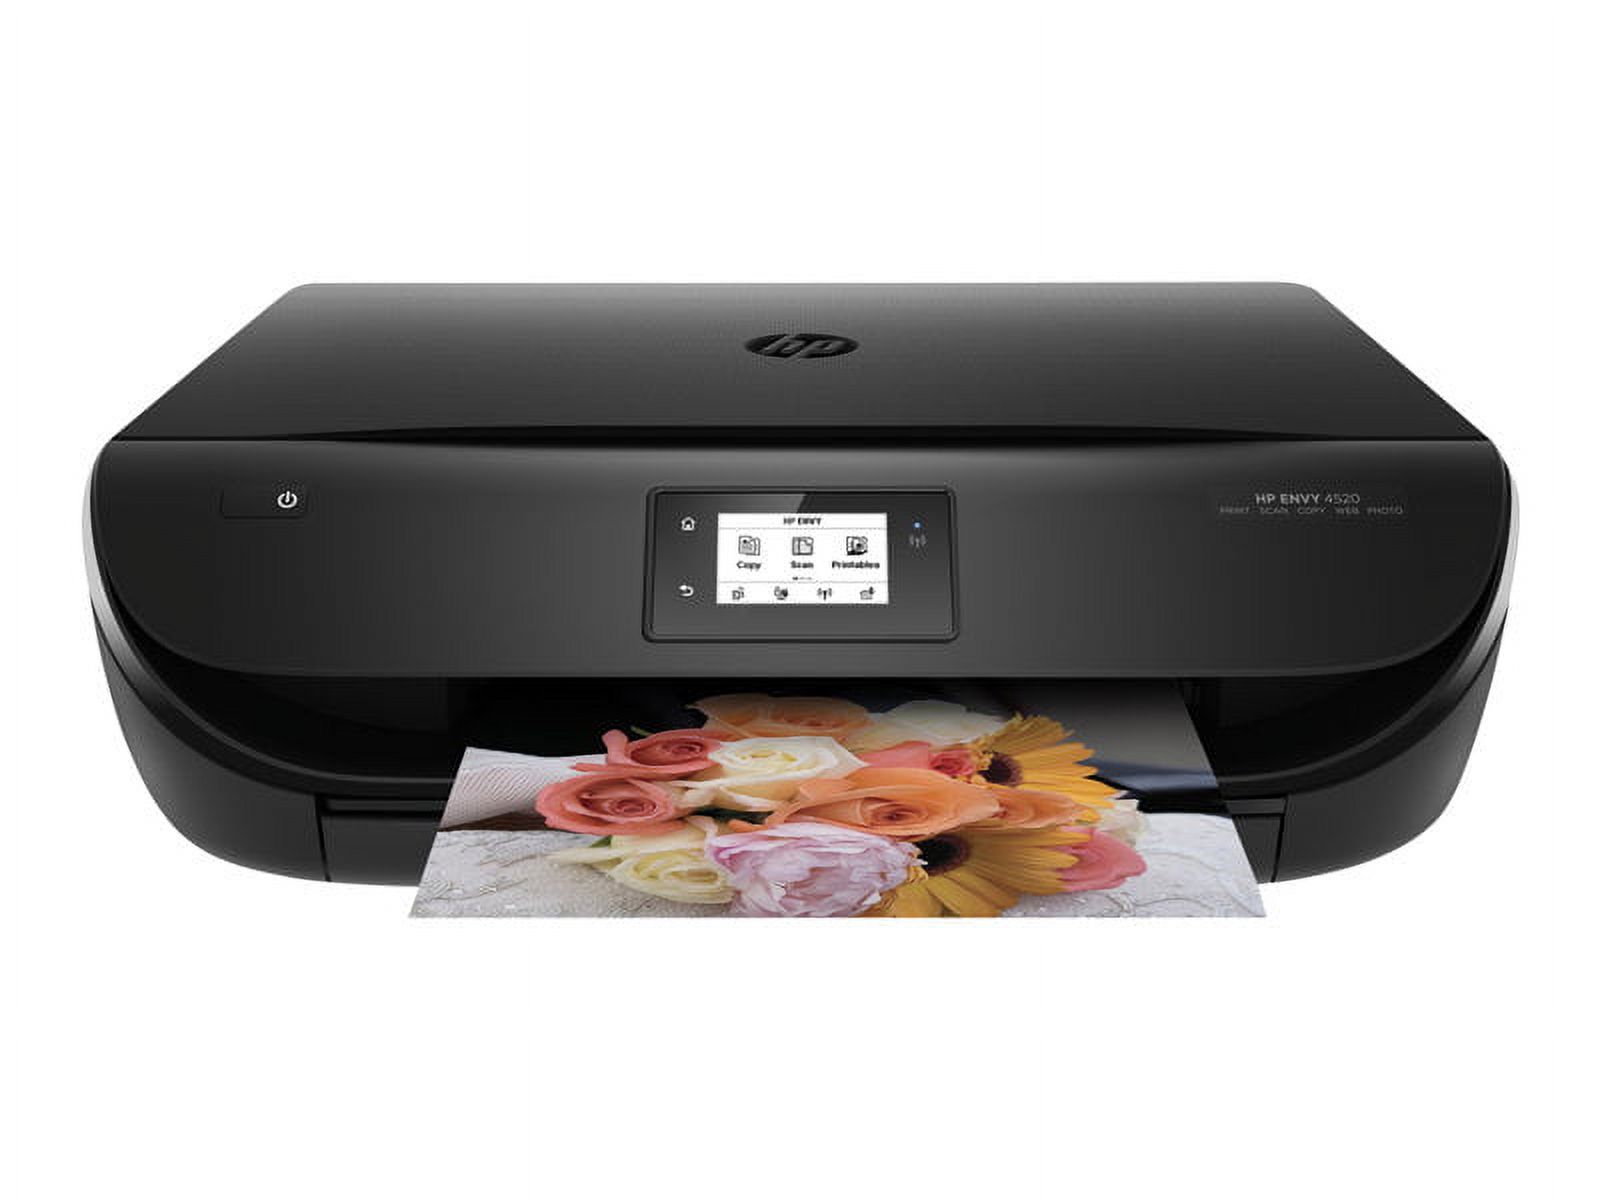 HP Envy 4520 All-in-One - multifunction printer (color) - image 3 of 33